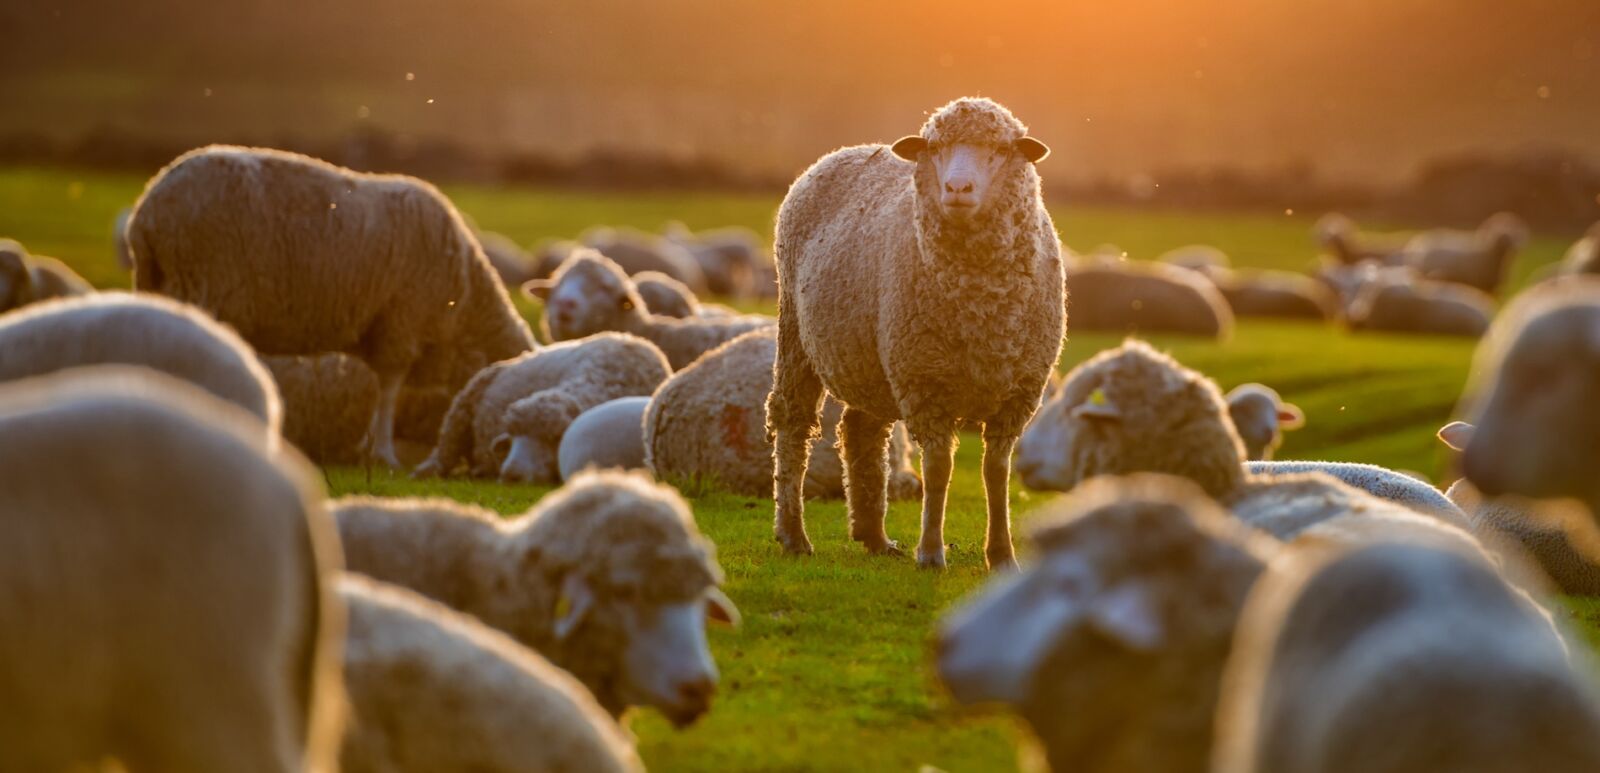 Sheep in a field at sunset. Photo via Shutterstock.